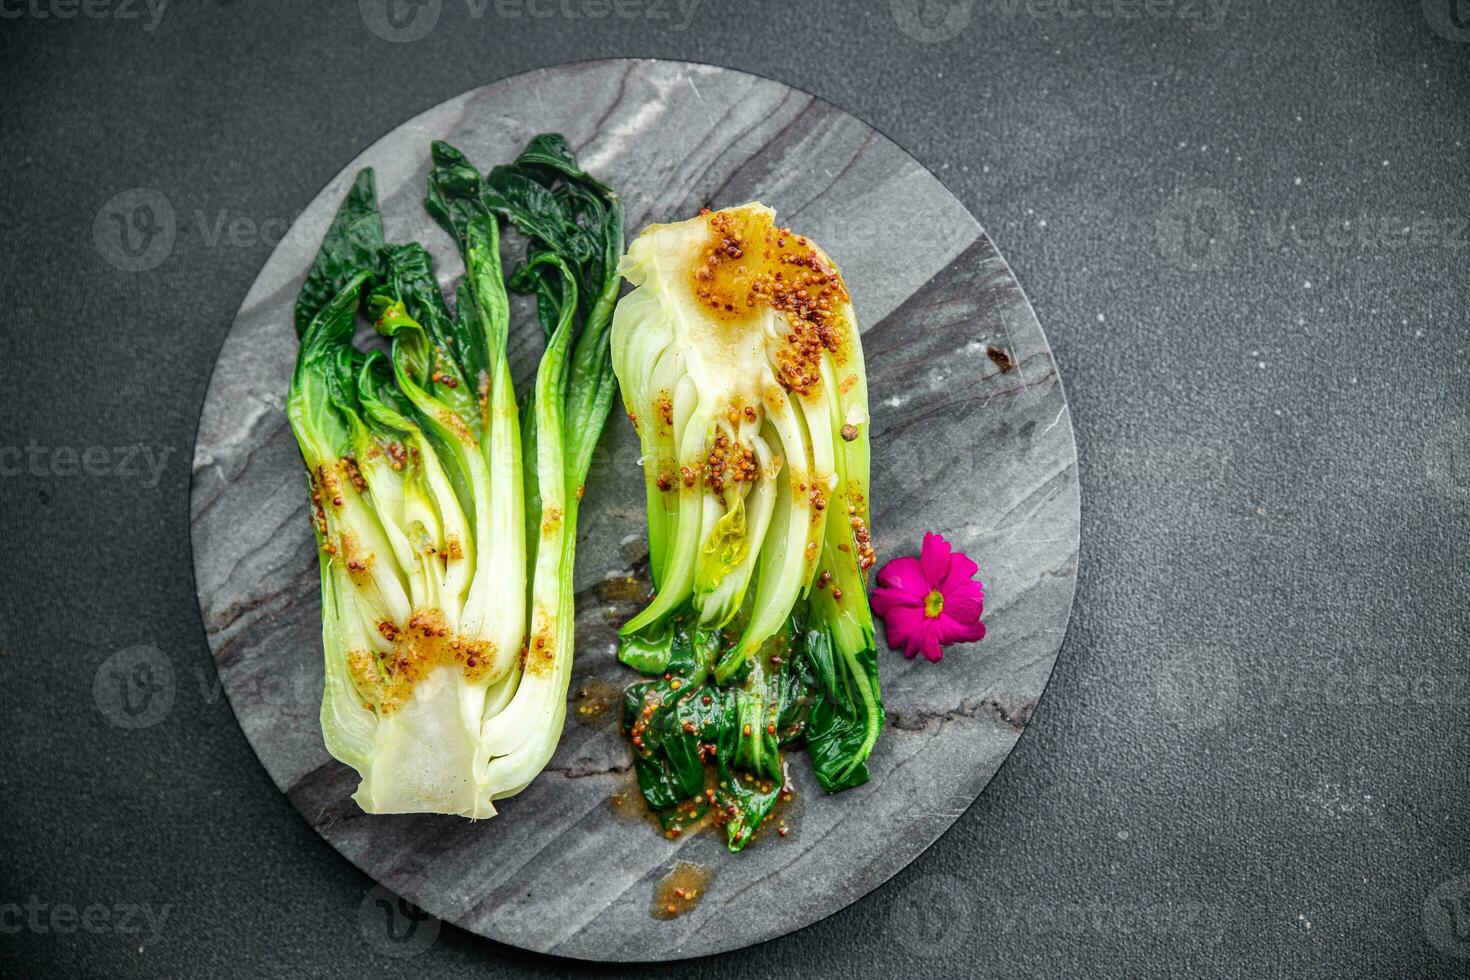 Bok choy or pak choy dish , Chinese cabbage vegetable healthy meal food snack on the table copy space food background rustic top view photo